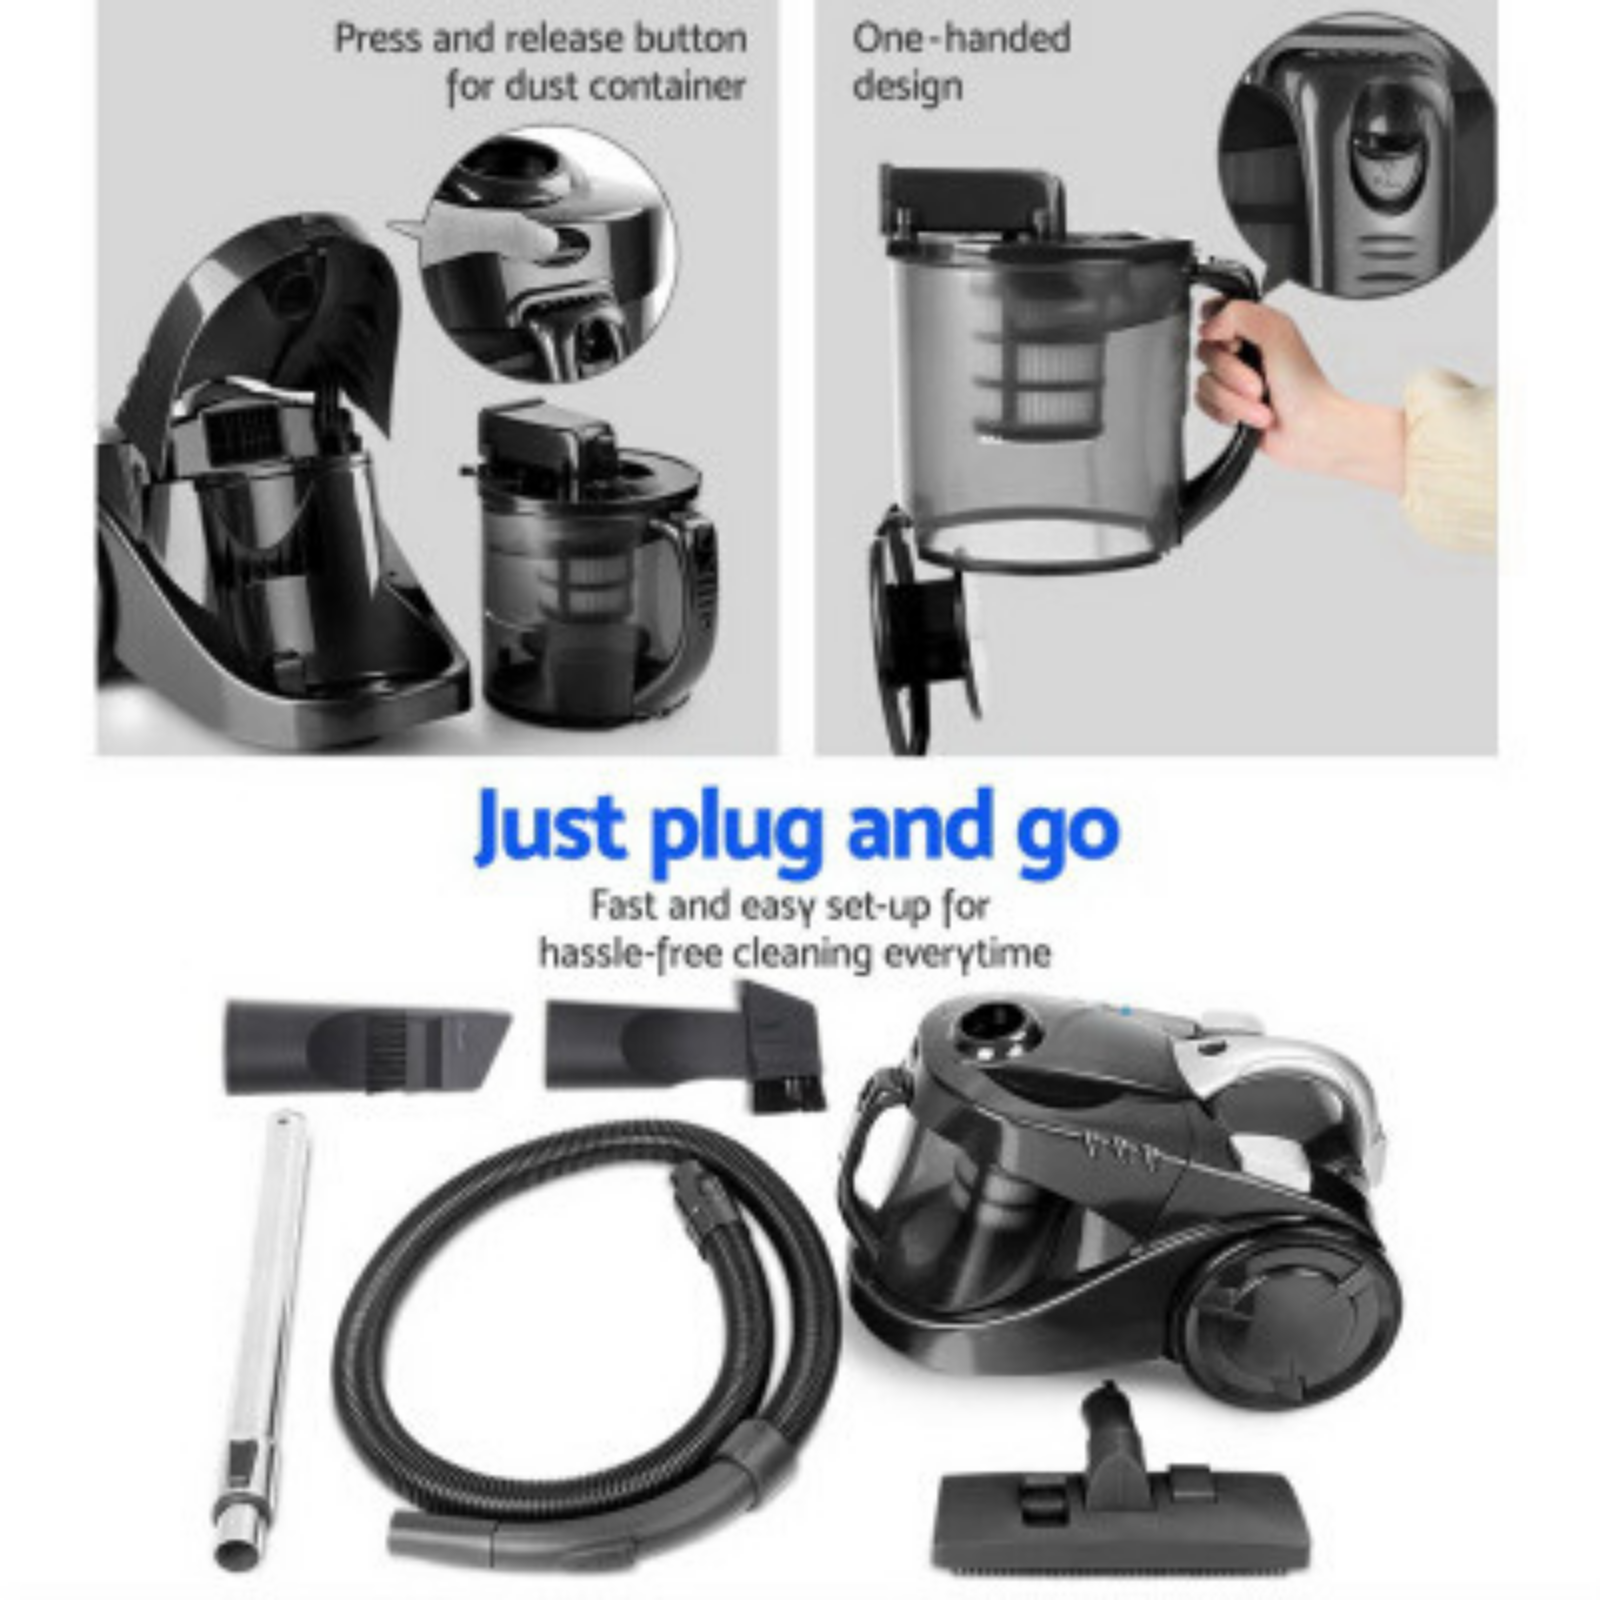 Bagless Vacuum Cleaner is just plug and go, has one-handed design, fast and easy set-up for hassle-free cleaning